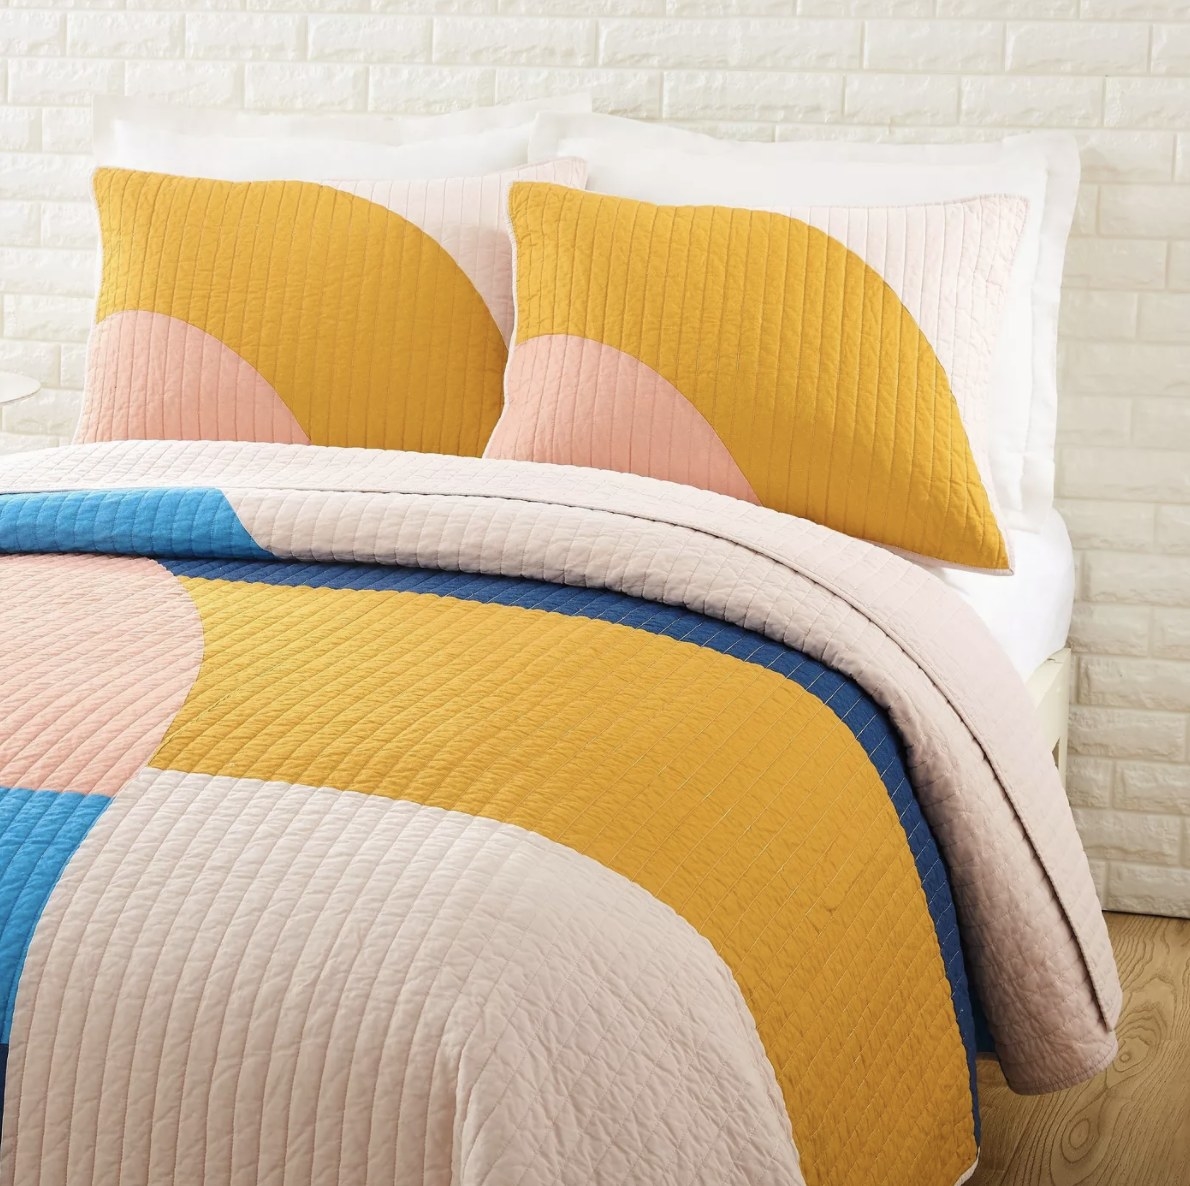 The mod shaped yellow, blue and pink toned comforter on a bed pops in a white room